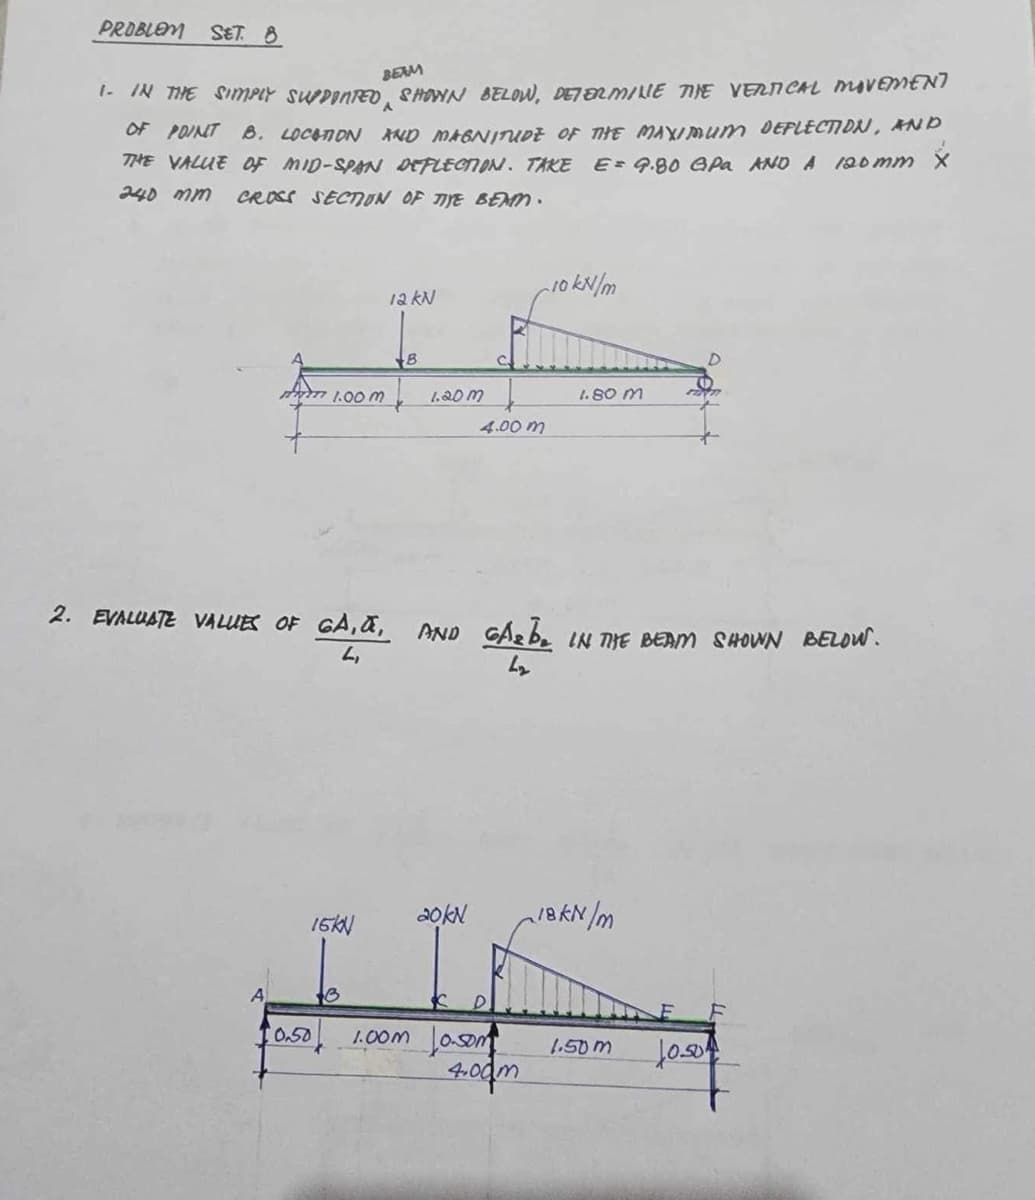 PROBLEM SET. 8
BEAM
1. IN THE SIMPLY SUPPORTED, SHOWN BELOW, DETERMINE THE VERTICAL MOVEMENT
OF POINT B. LOCATION AND MAGNITUDE OF THE MAXIMUM DEFLECTION, AND
THE VALUE OF MID-SPAN DEFLECTION. TAKE E = 9.80 GPa AND A 120mm X
240 mm CROSS SECTION OF TIYE BEAM.
12 kN
10 kN/m
1.00 m
B
1.20m
1.80 m
4.00 m
2. EVALUATE VALUES OF GA, α, AND GA₂be IN THE BEAM SHOWN BELOW.
L,
GARBE
20kN
18kN/m
16KN
0.50
1.00m Joom
4.00m
1.50m
1050